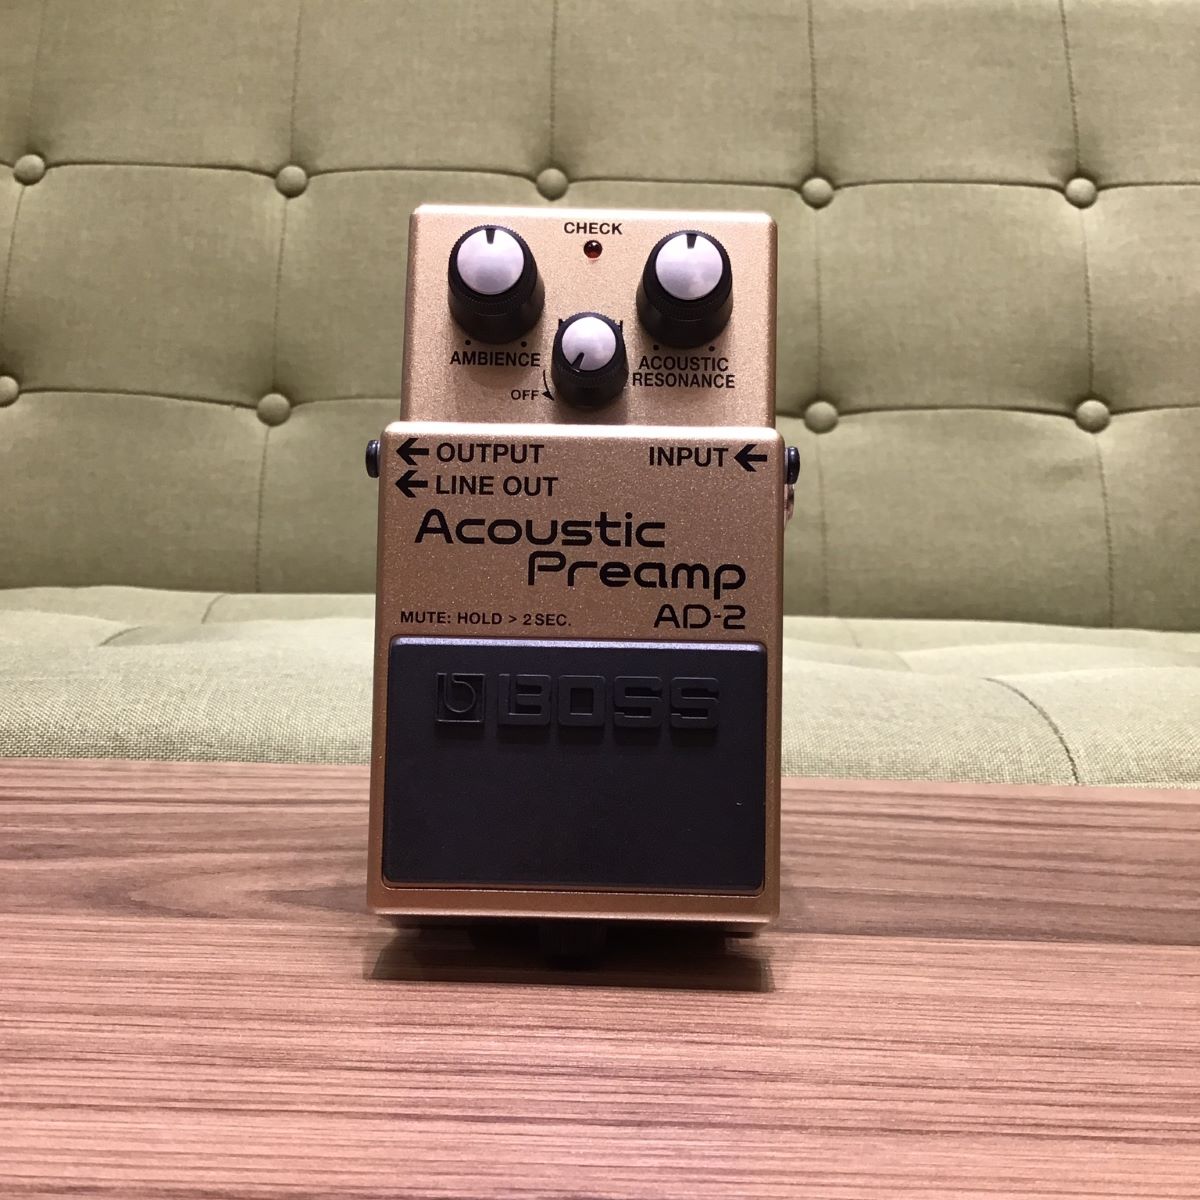 BOSS AD-2 Acoustic Preamp アコギ用 プリアンプ AD2 ボス 